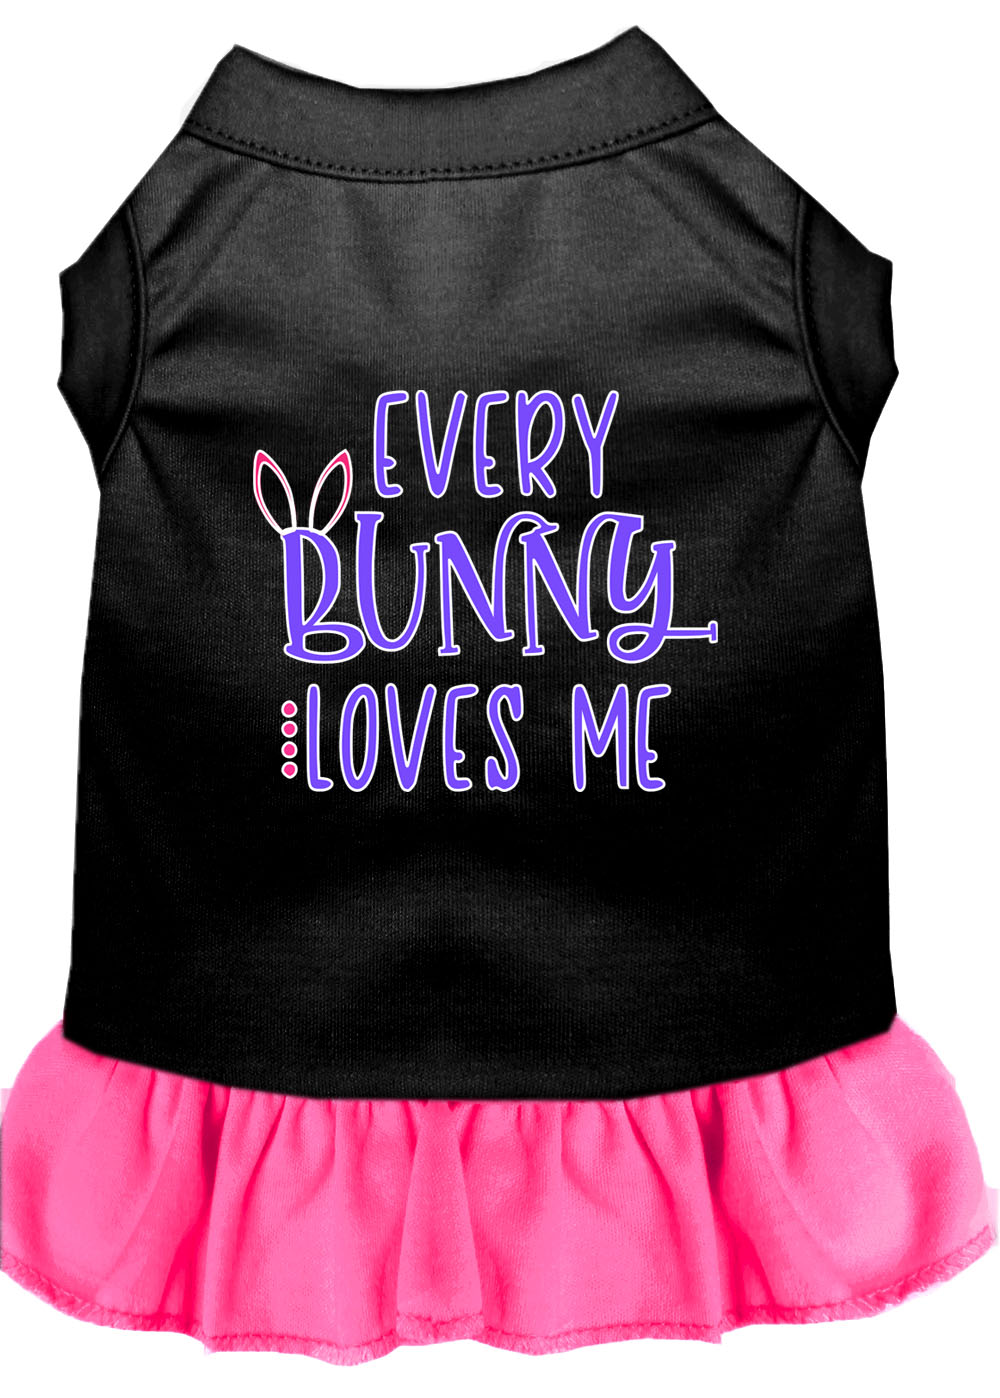 Every Bunny Loves me Screen Print Dog Dress Black with Bright Pink Sm